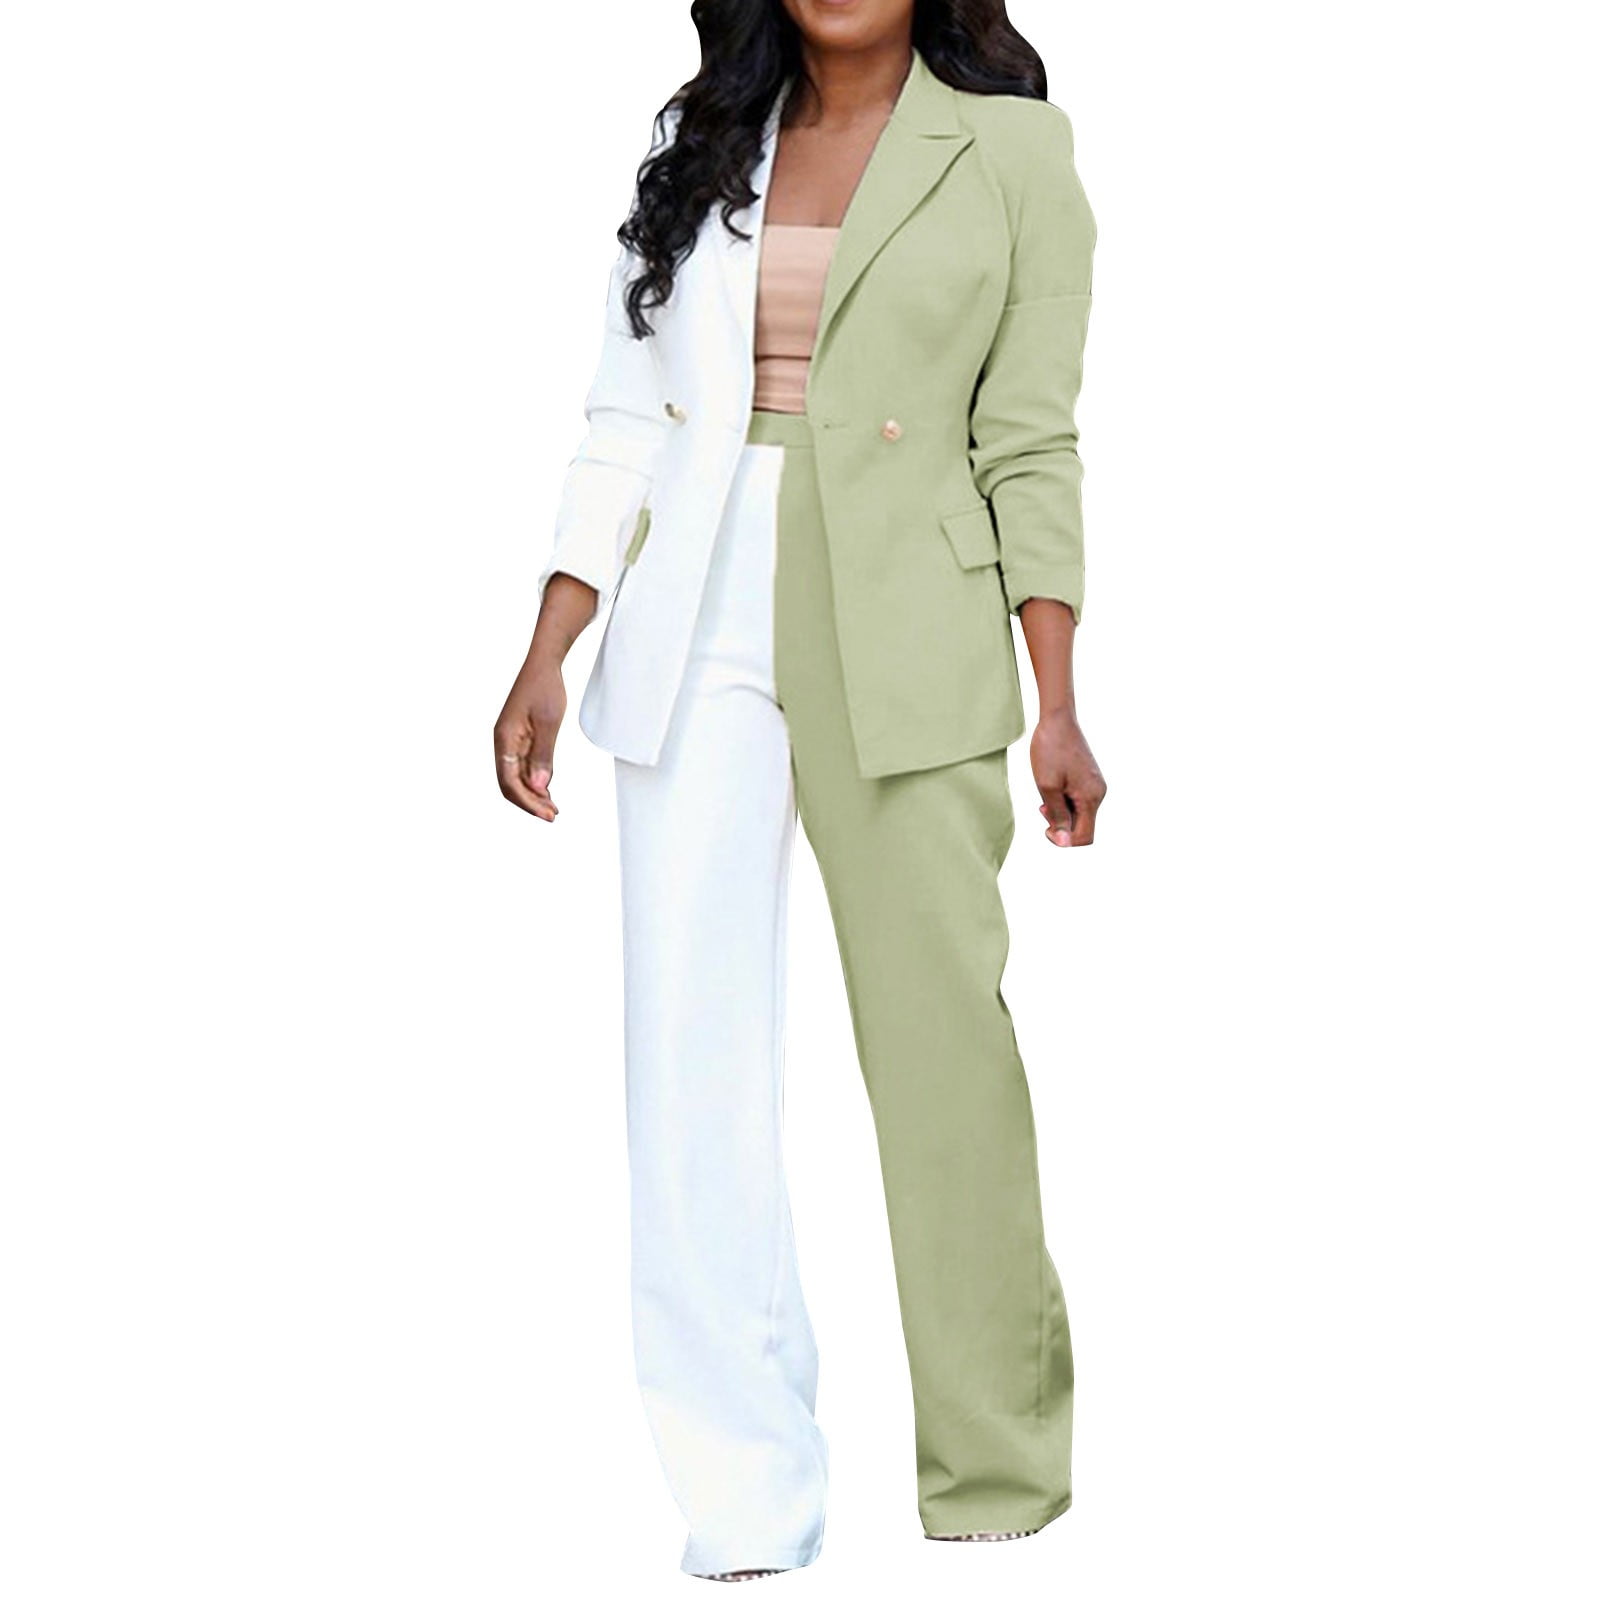 NKOOGH Wedding Pant Suits for Women Two Piece for Women Pants Suit Women  Fashion Casual Clothes Long Sleeve Assorted Colors Blazer High Waist Suit